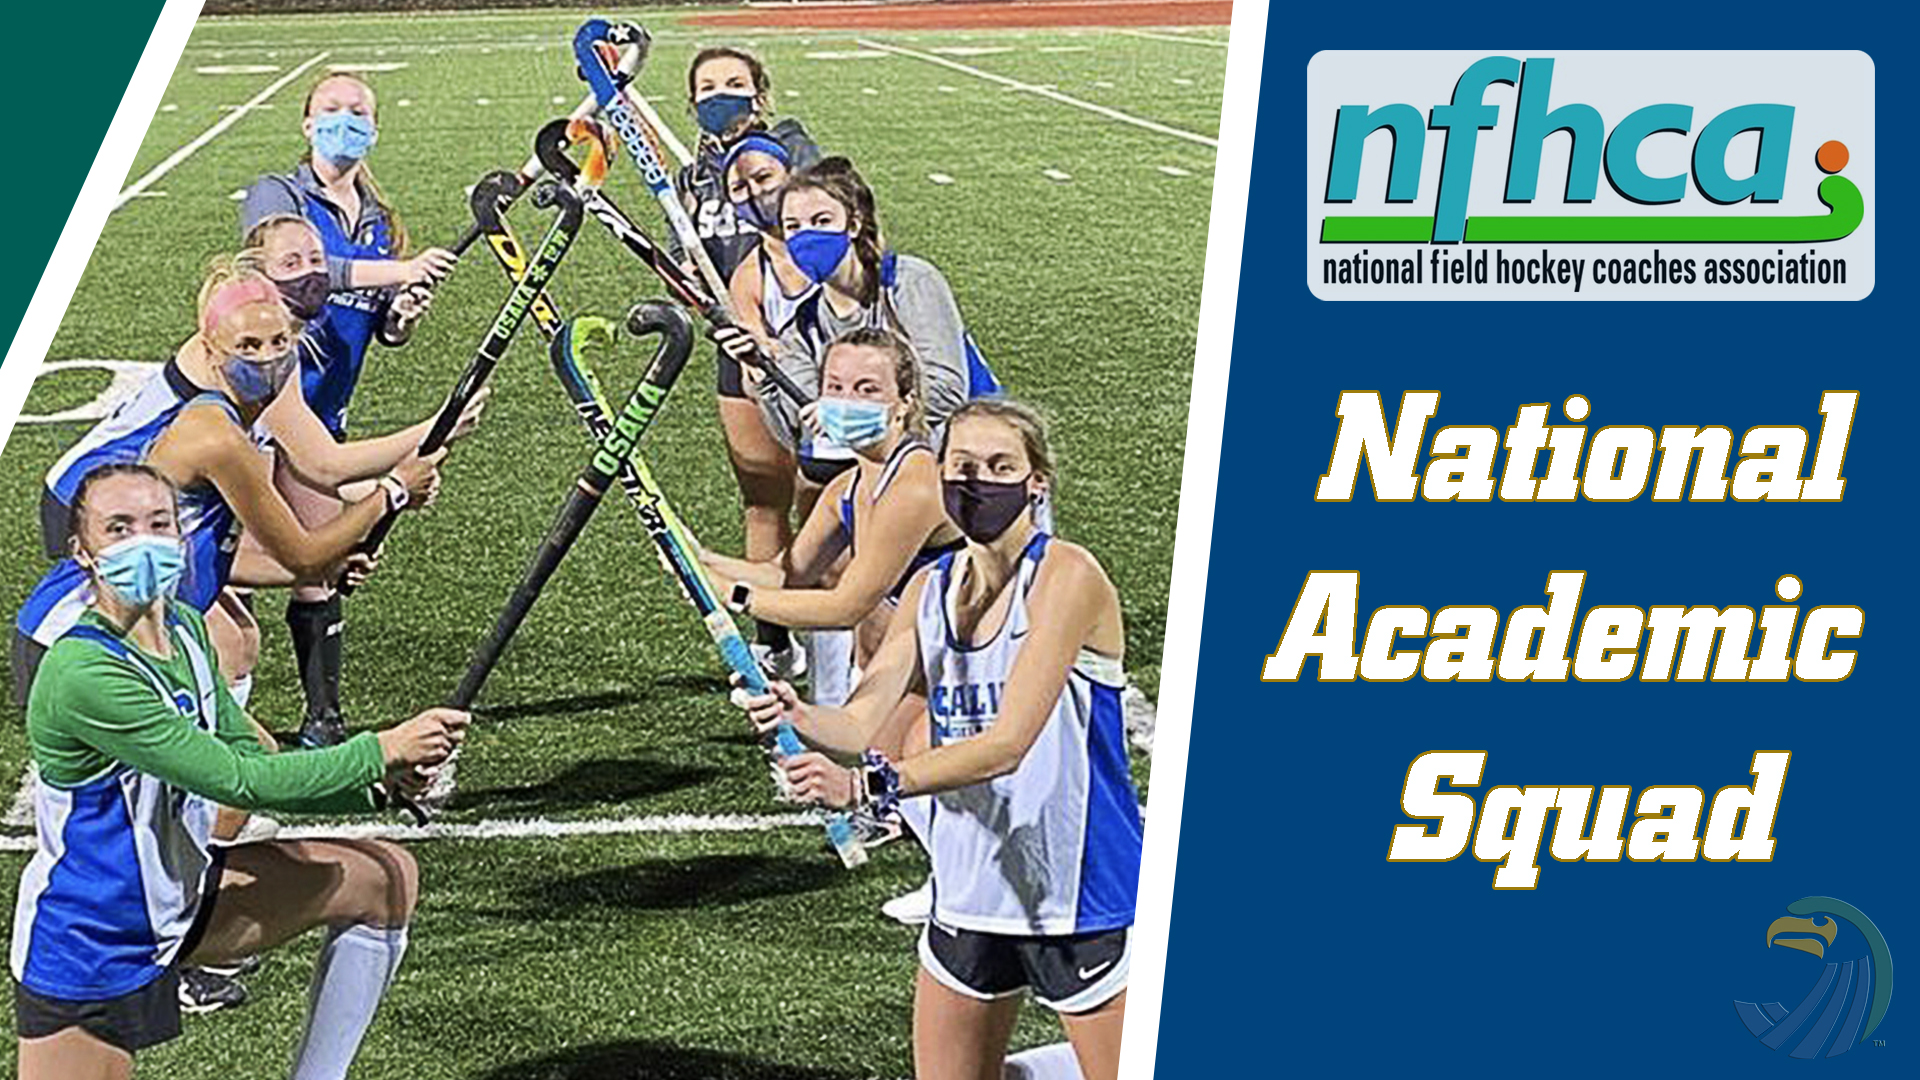 17 Seahawks earned recognition from the NFHCA.